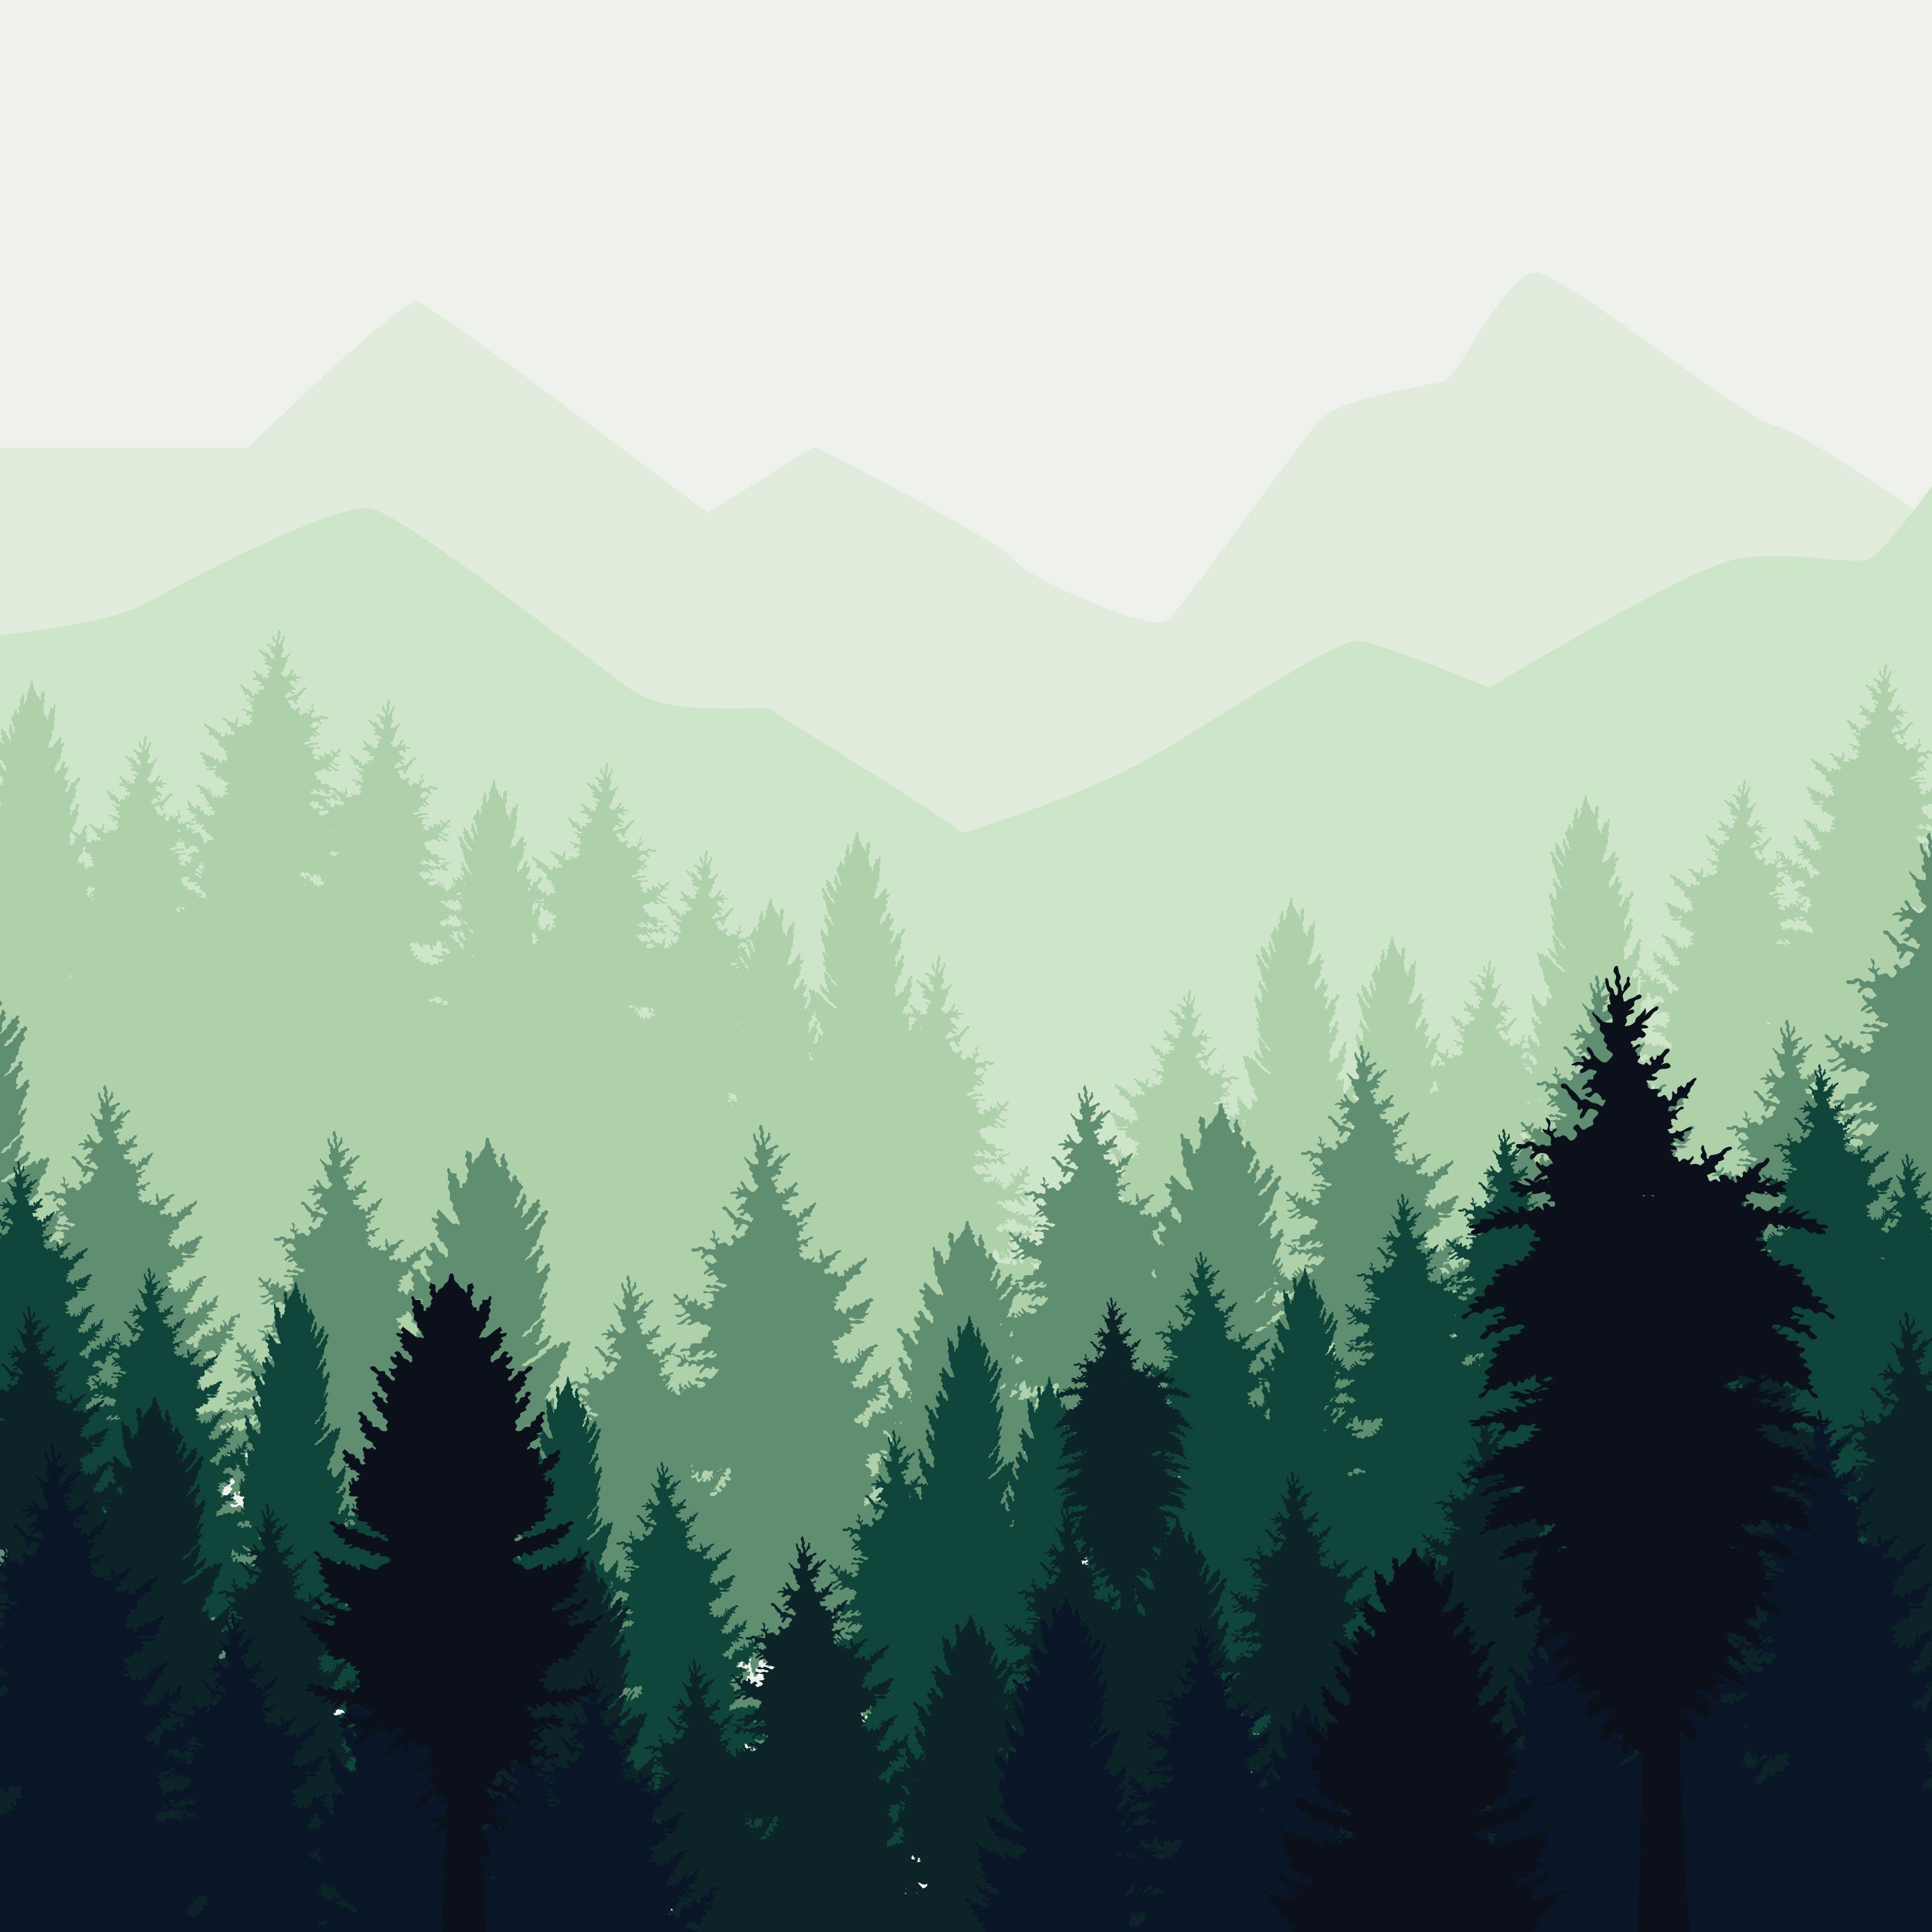 Download Abstract Forest Landscape Vector Art. Choose from over a million free vectors, clipart graphics, vector. Forest landscape, Forest illustration, Abstract